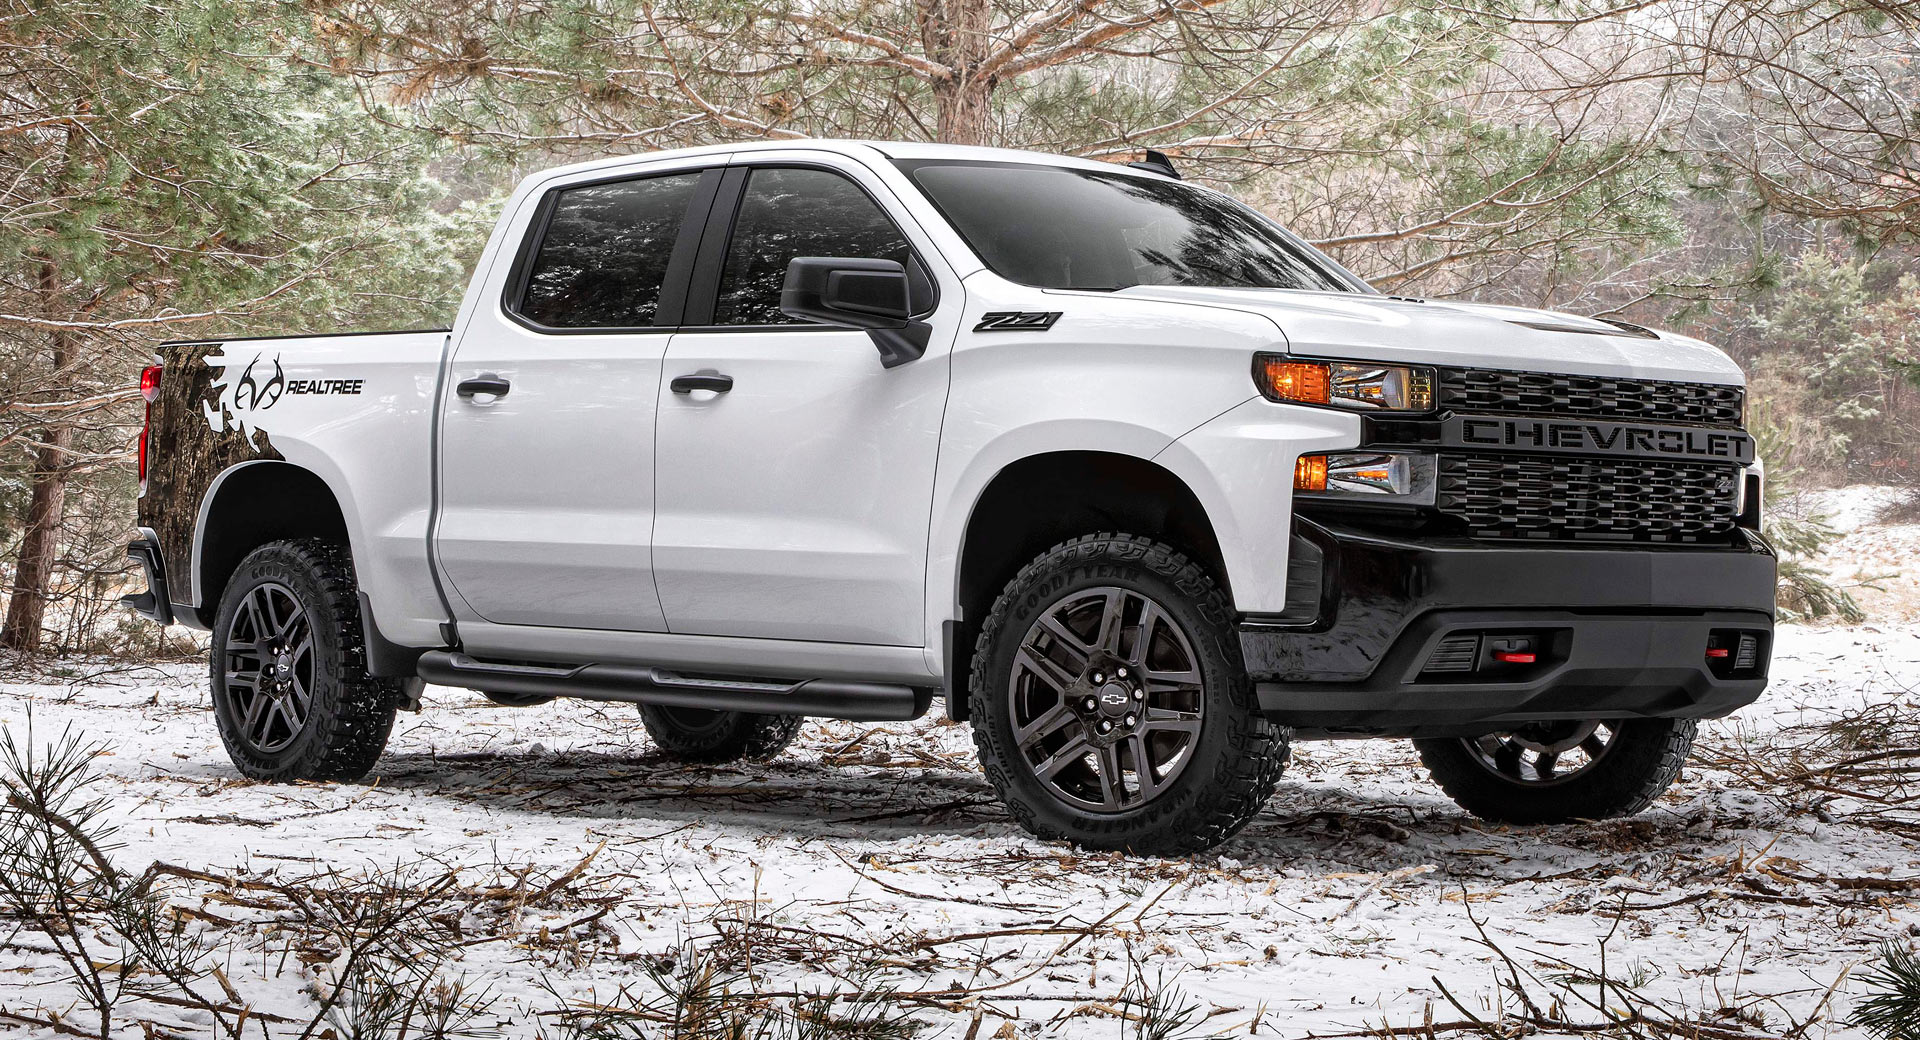 2021 Chevrolet Silverado Realtree Edition Thinks It Can Blend In With